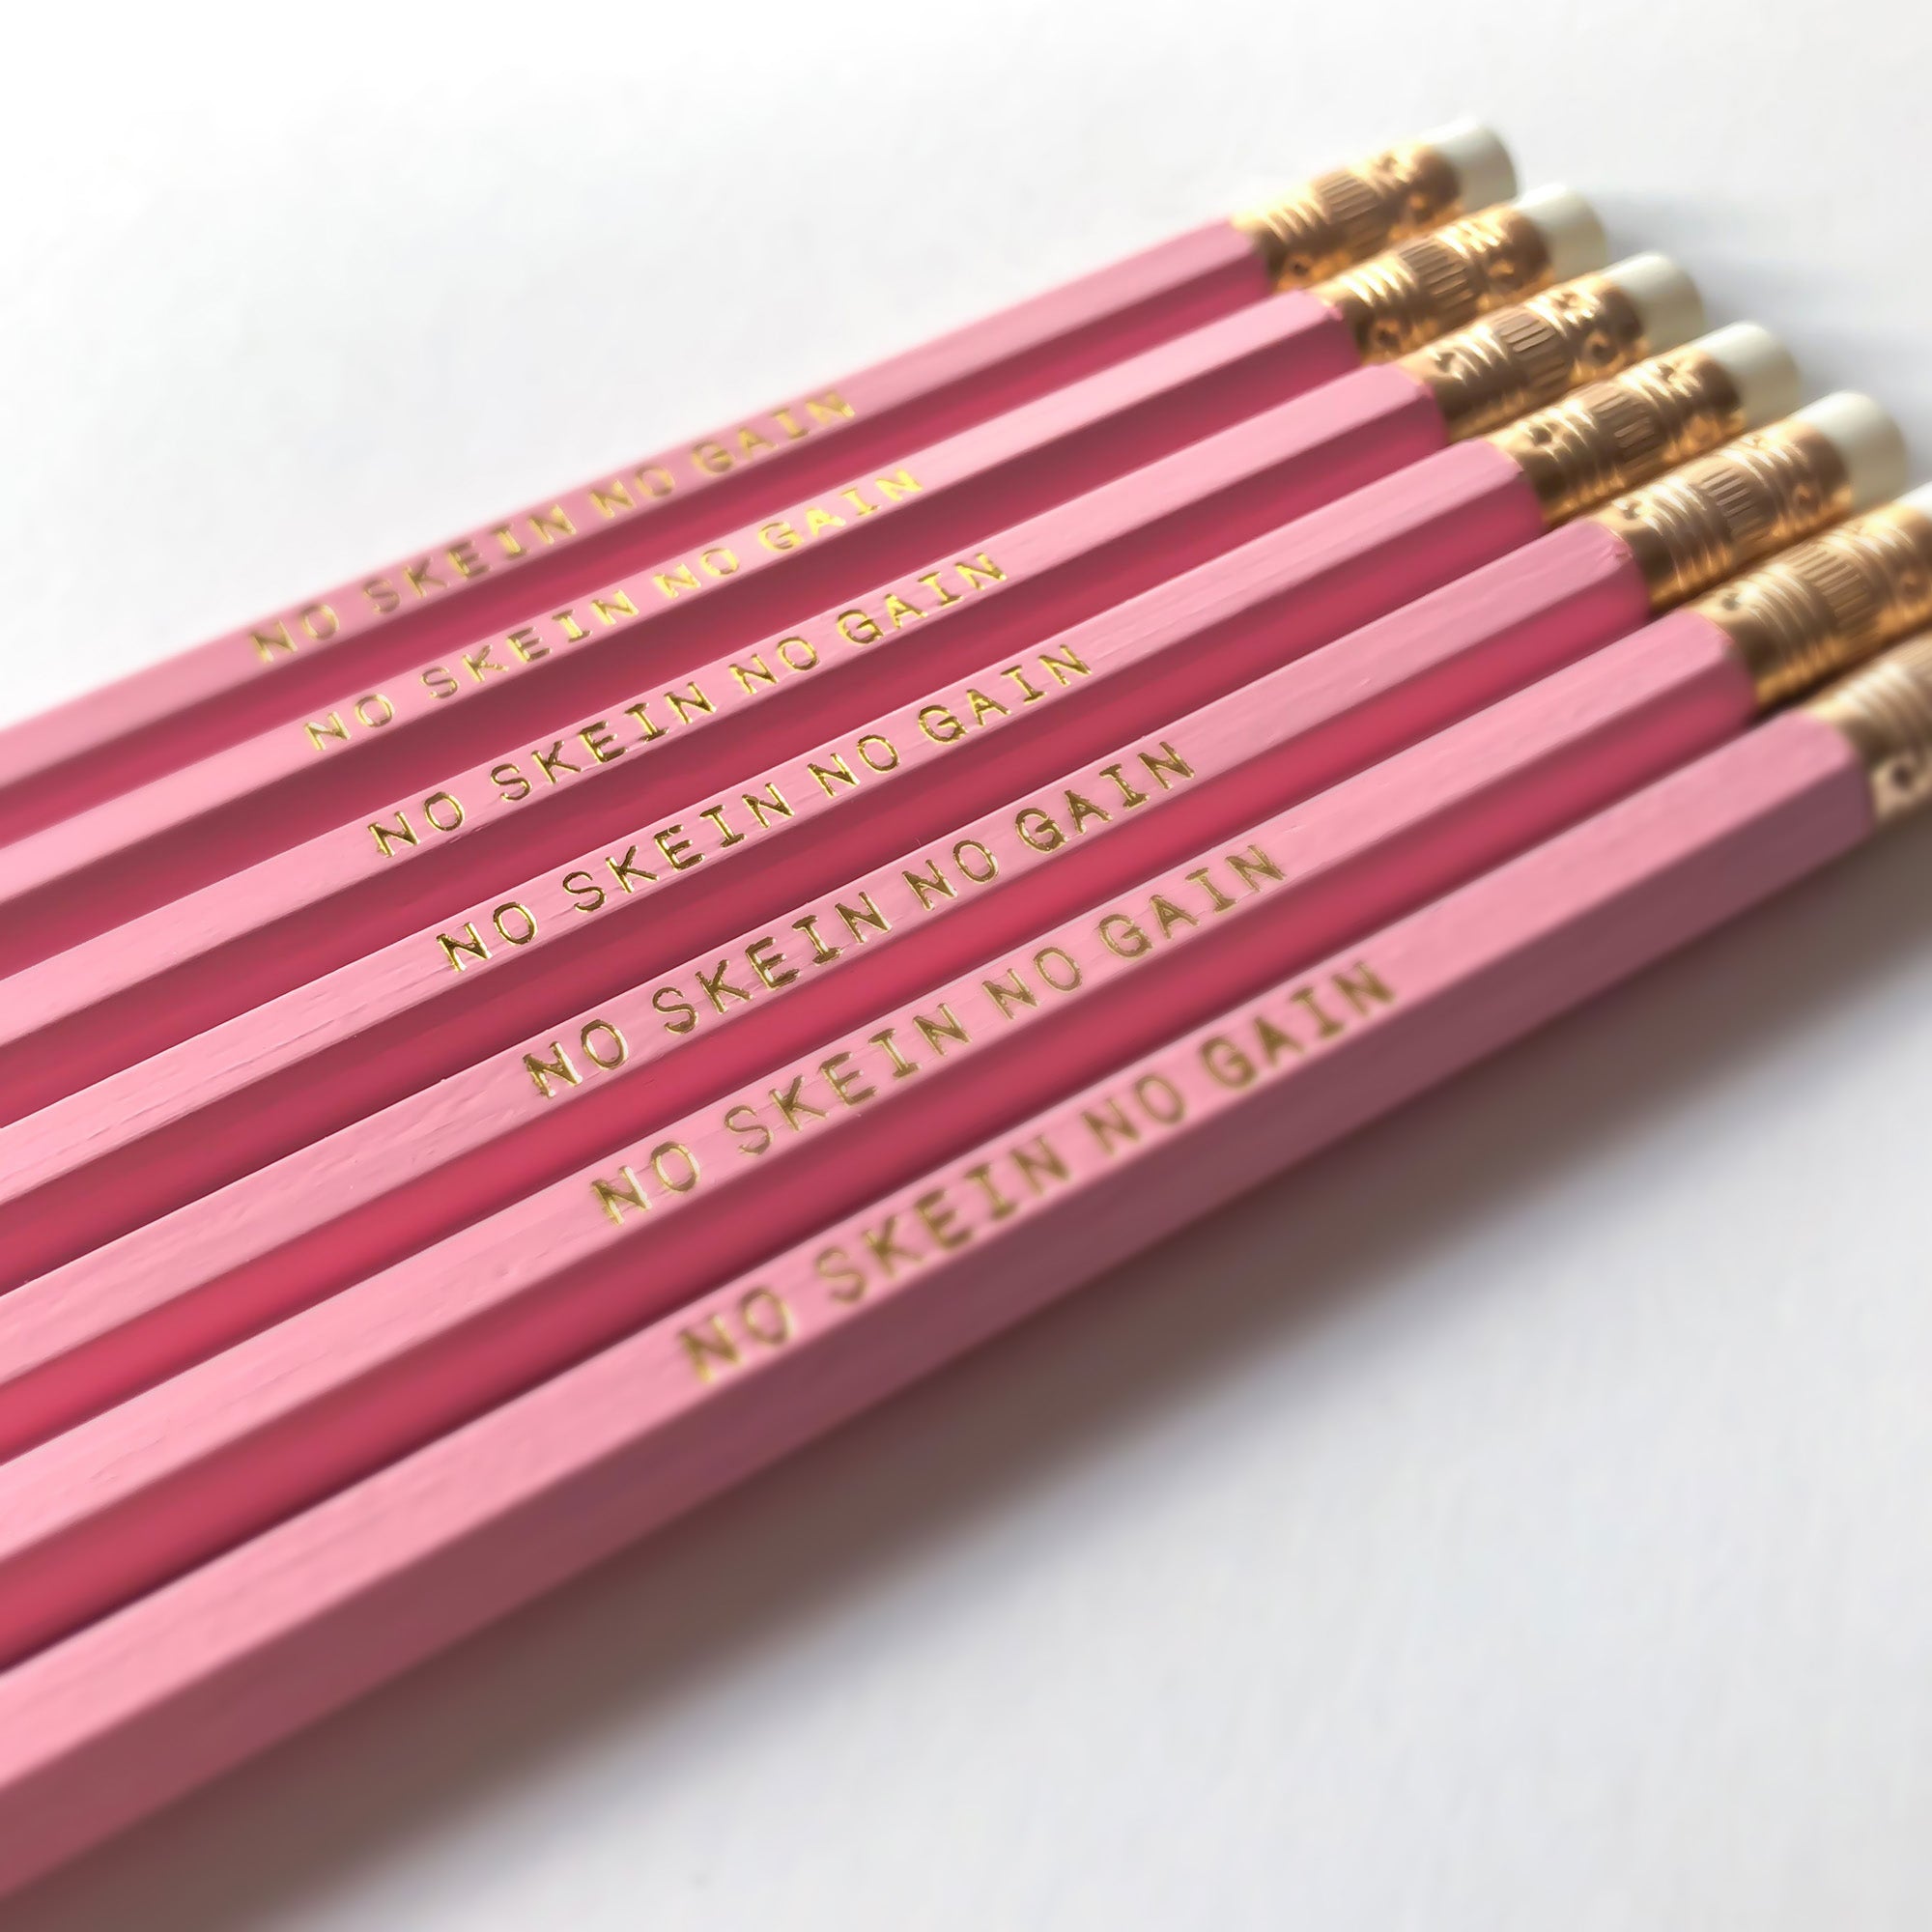 Made in America novelty pencil set gift for knitters